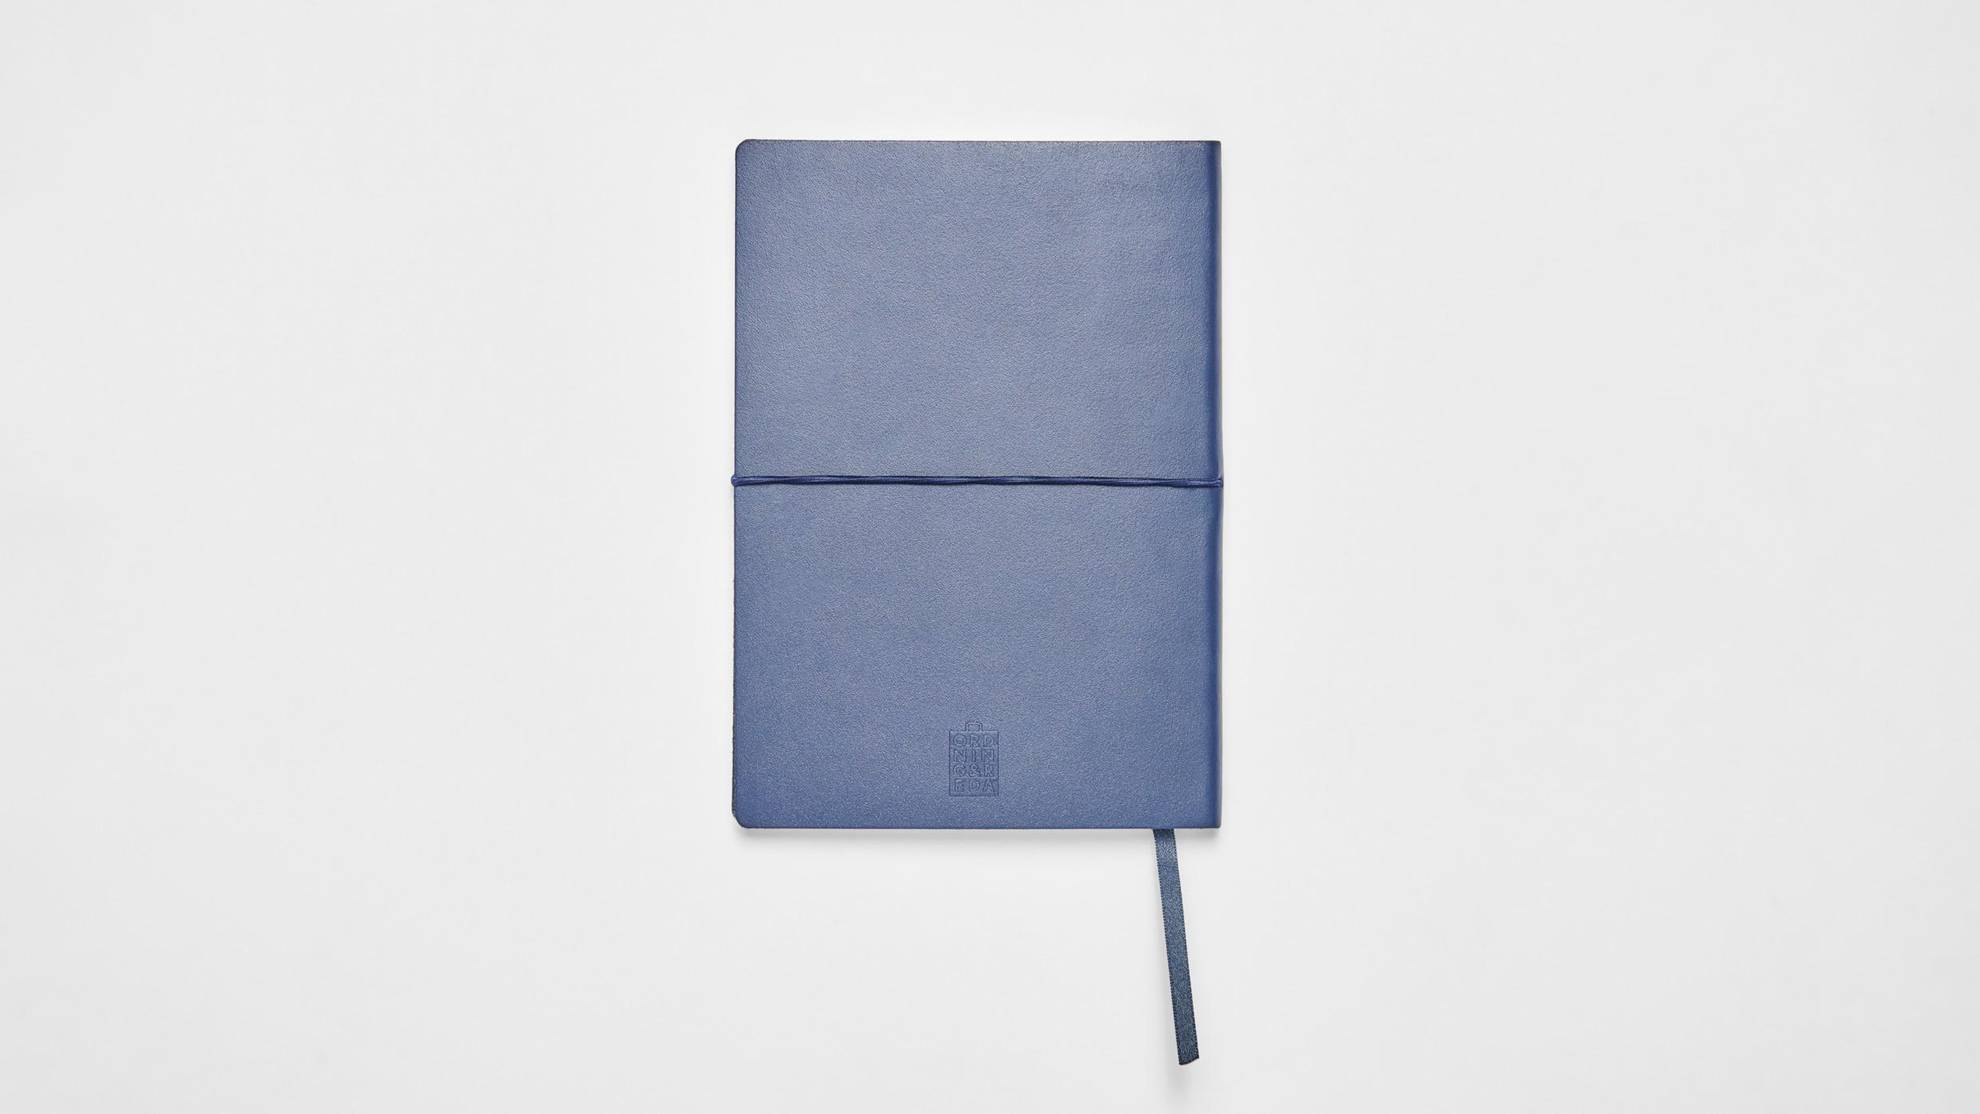 A blue seat pad on a white surface.